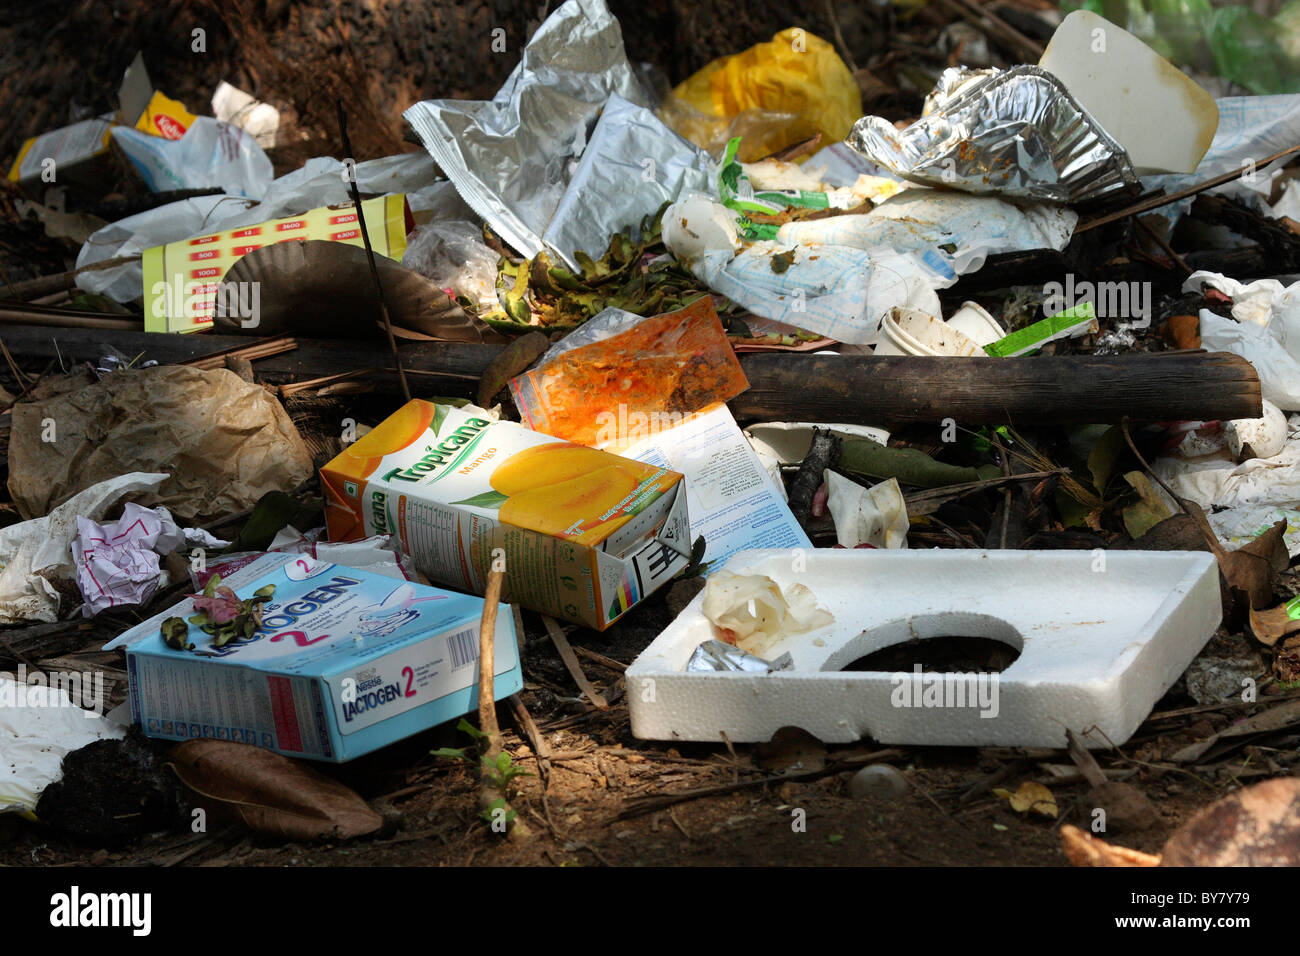 garbages dumped in a place carelessly Stock Photo